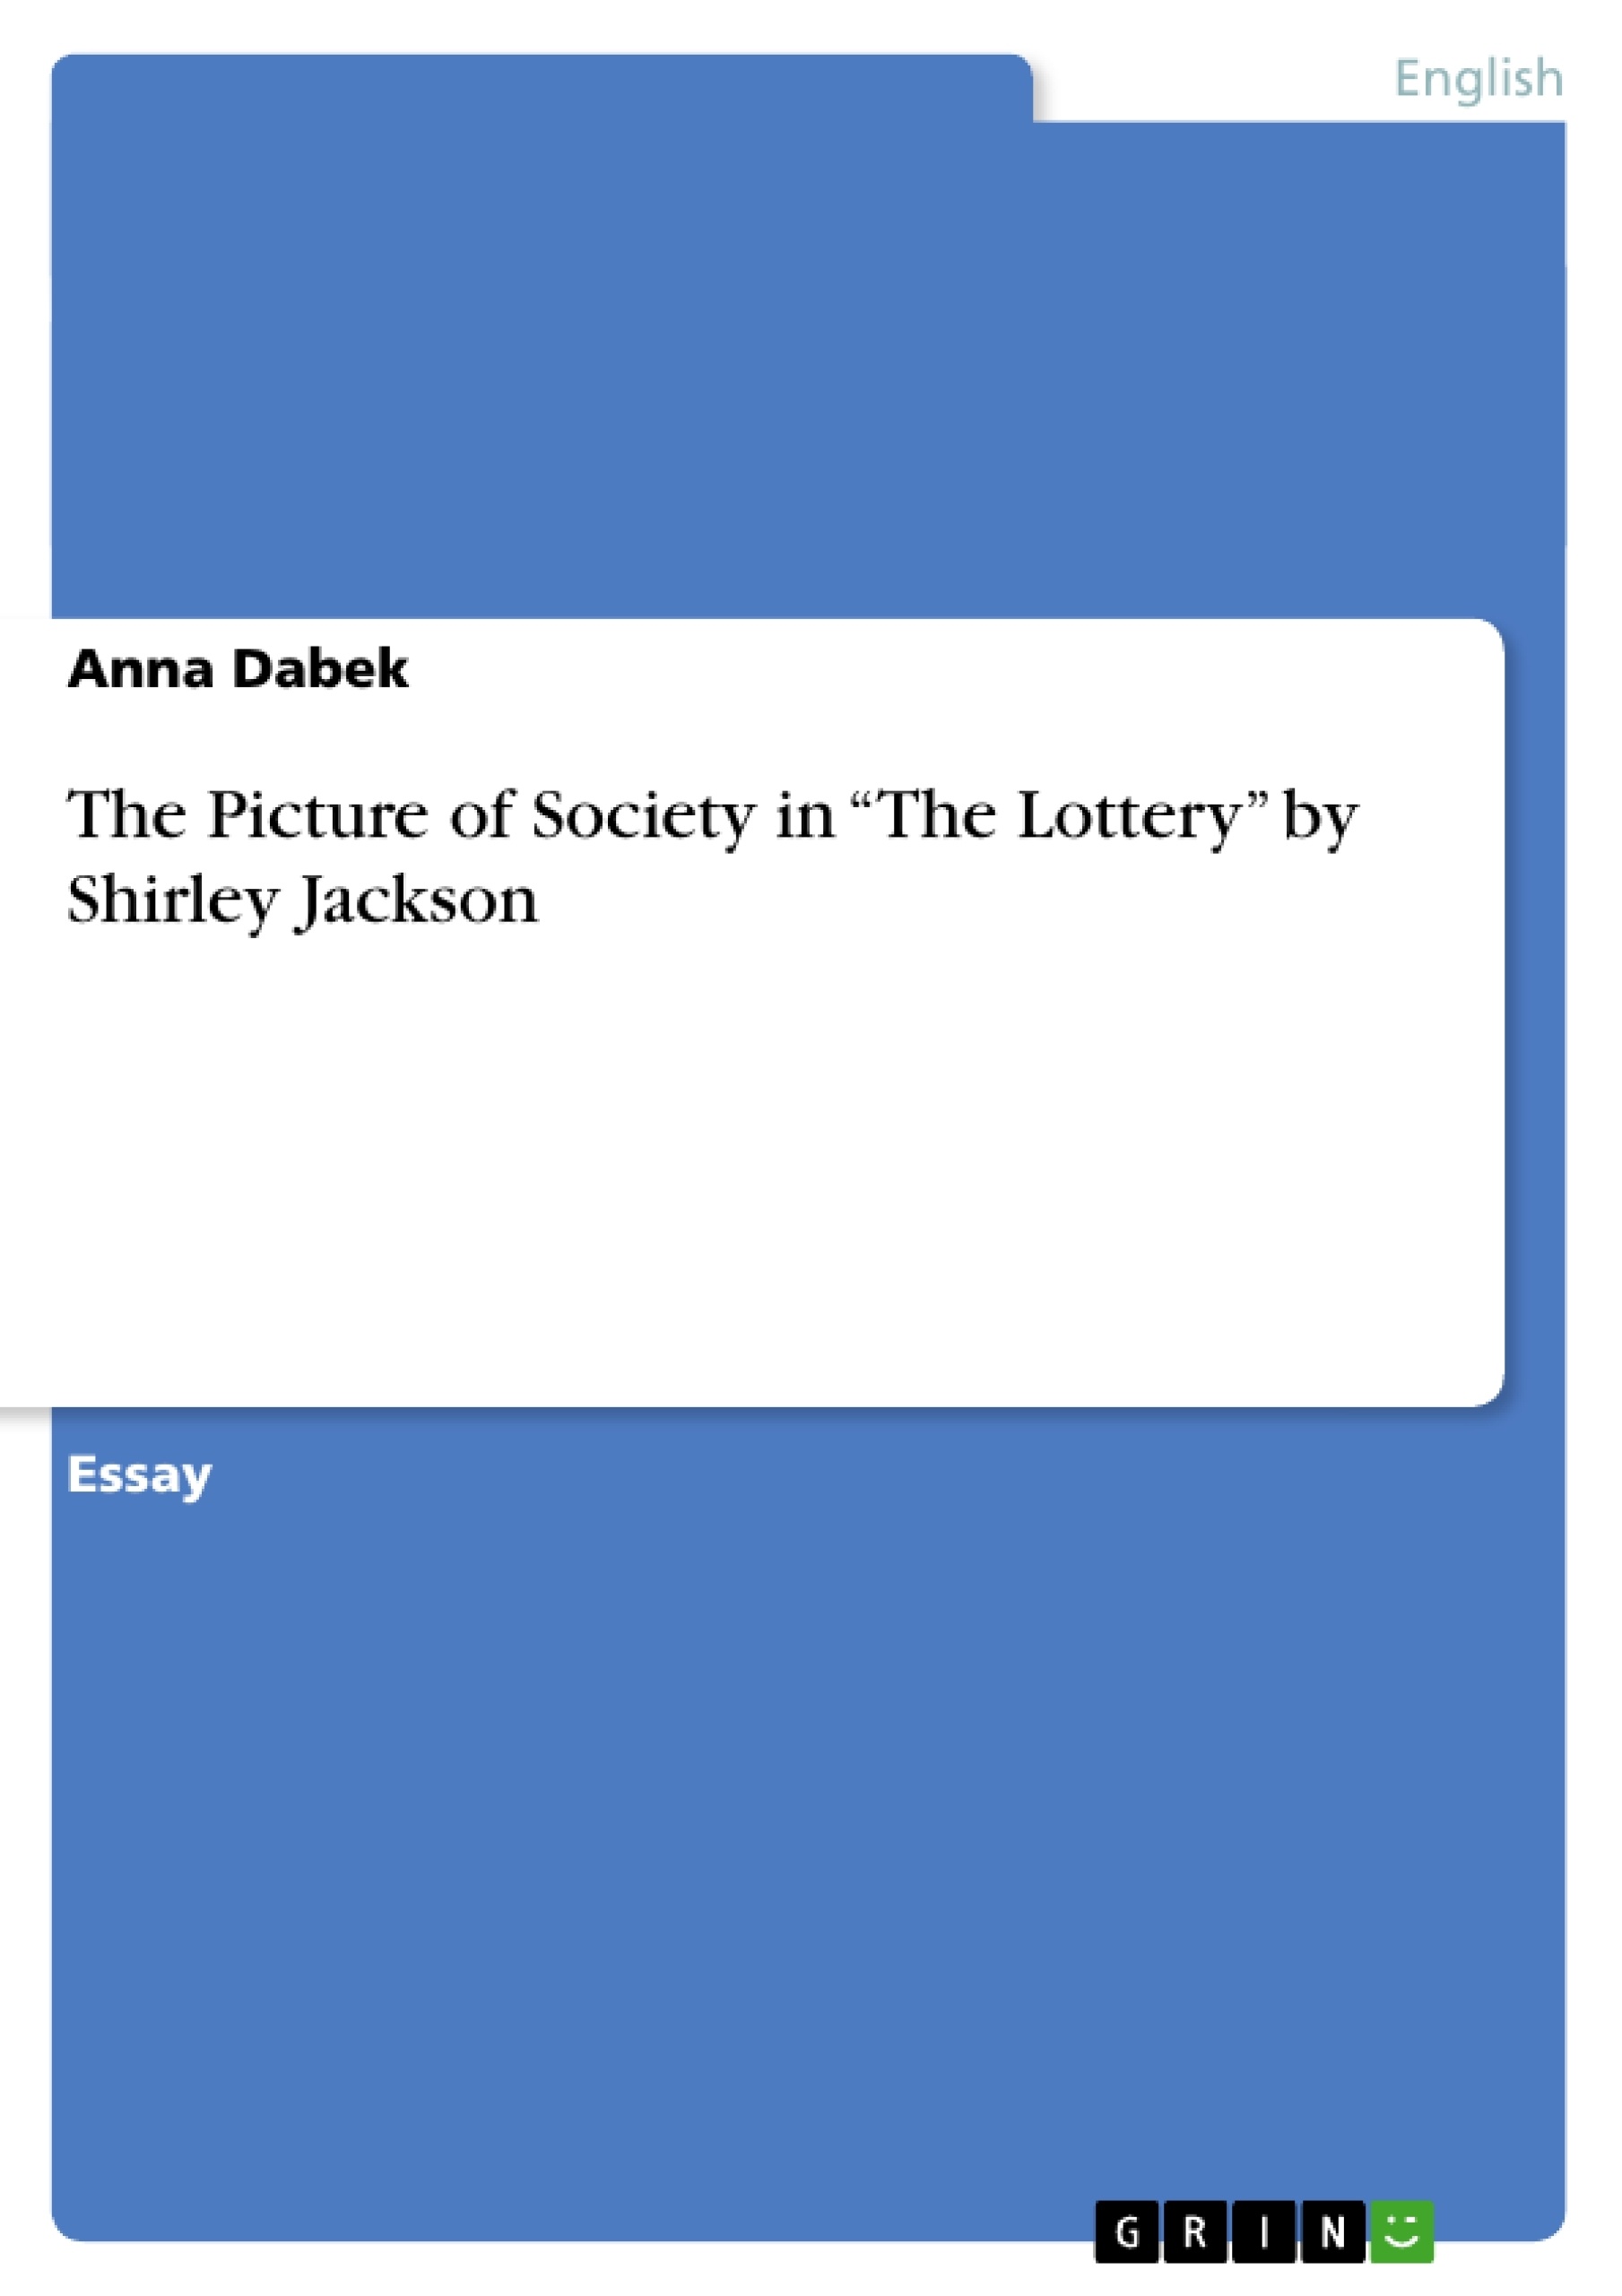 Реферат: Lottery Essay Research Paper Shirley Jackson